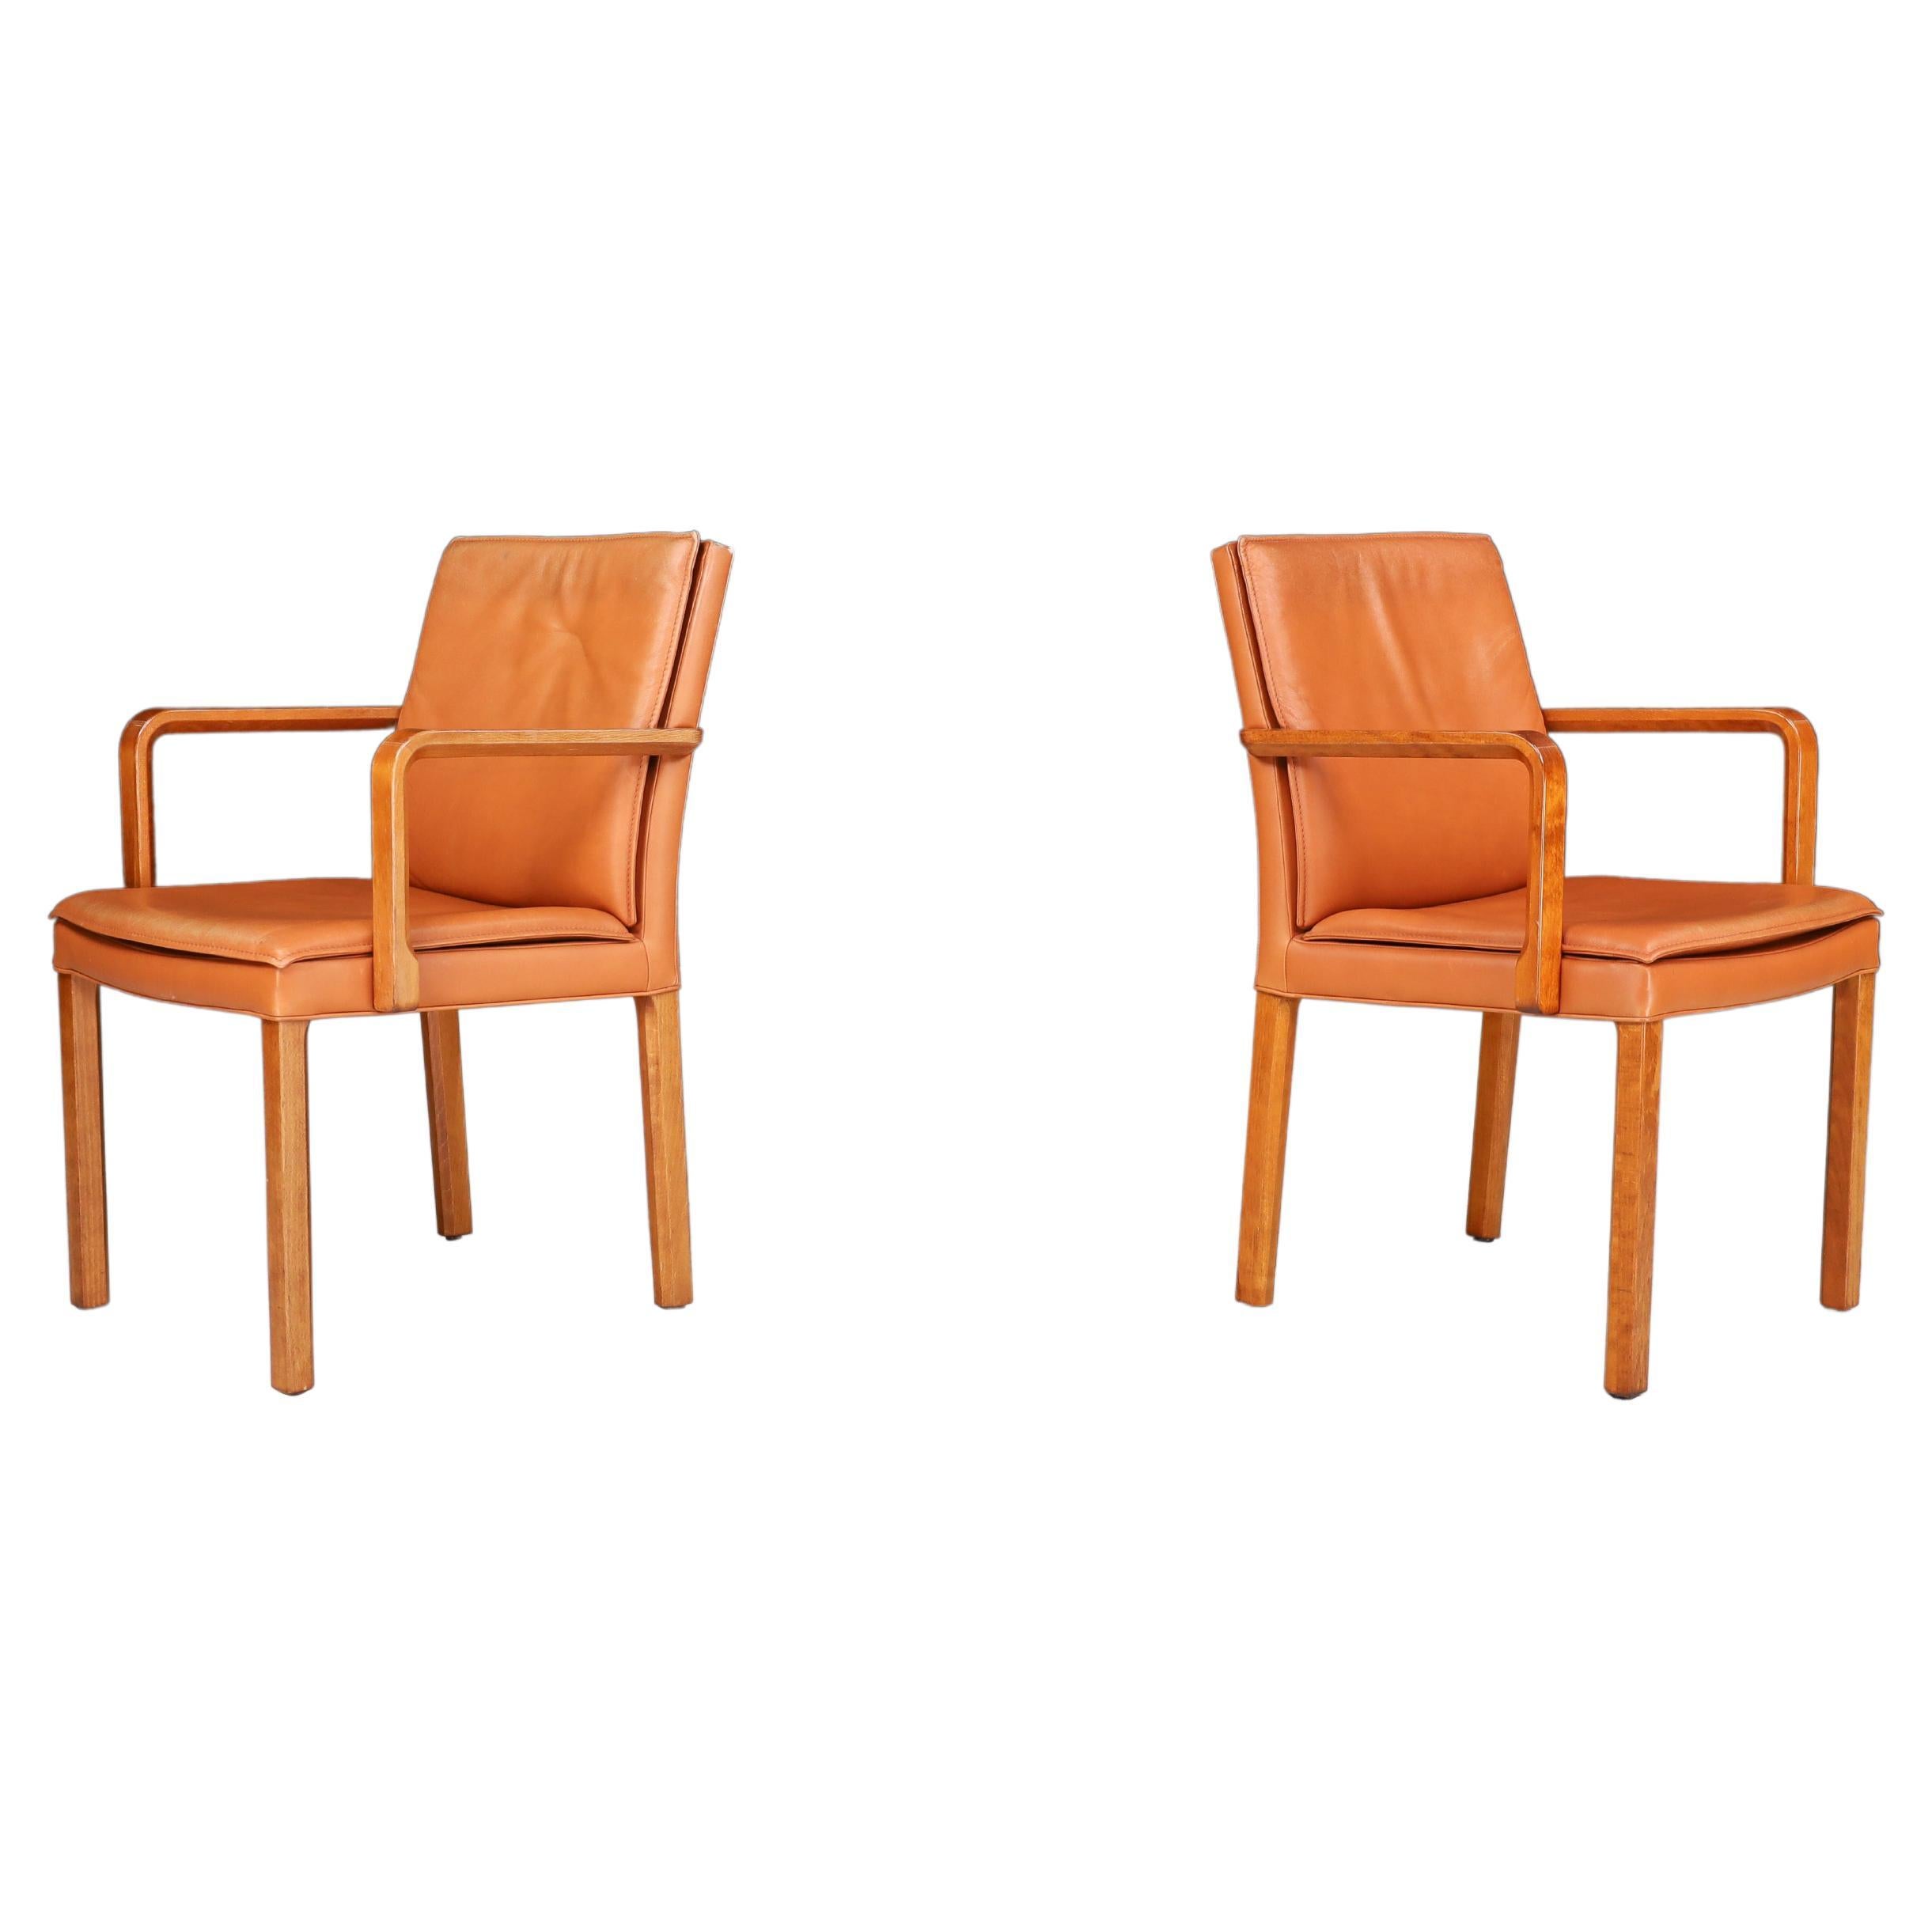 Walter Knoll Pair of two Arm chairs in Bentwood and Cognac Leather, Germany 1970